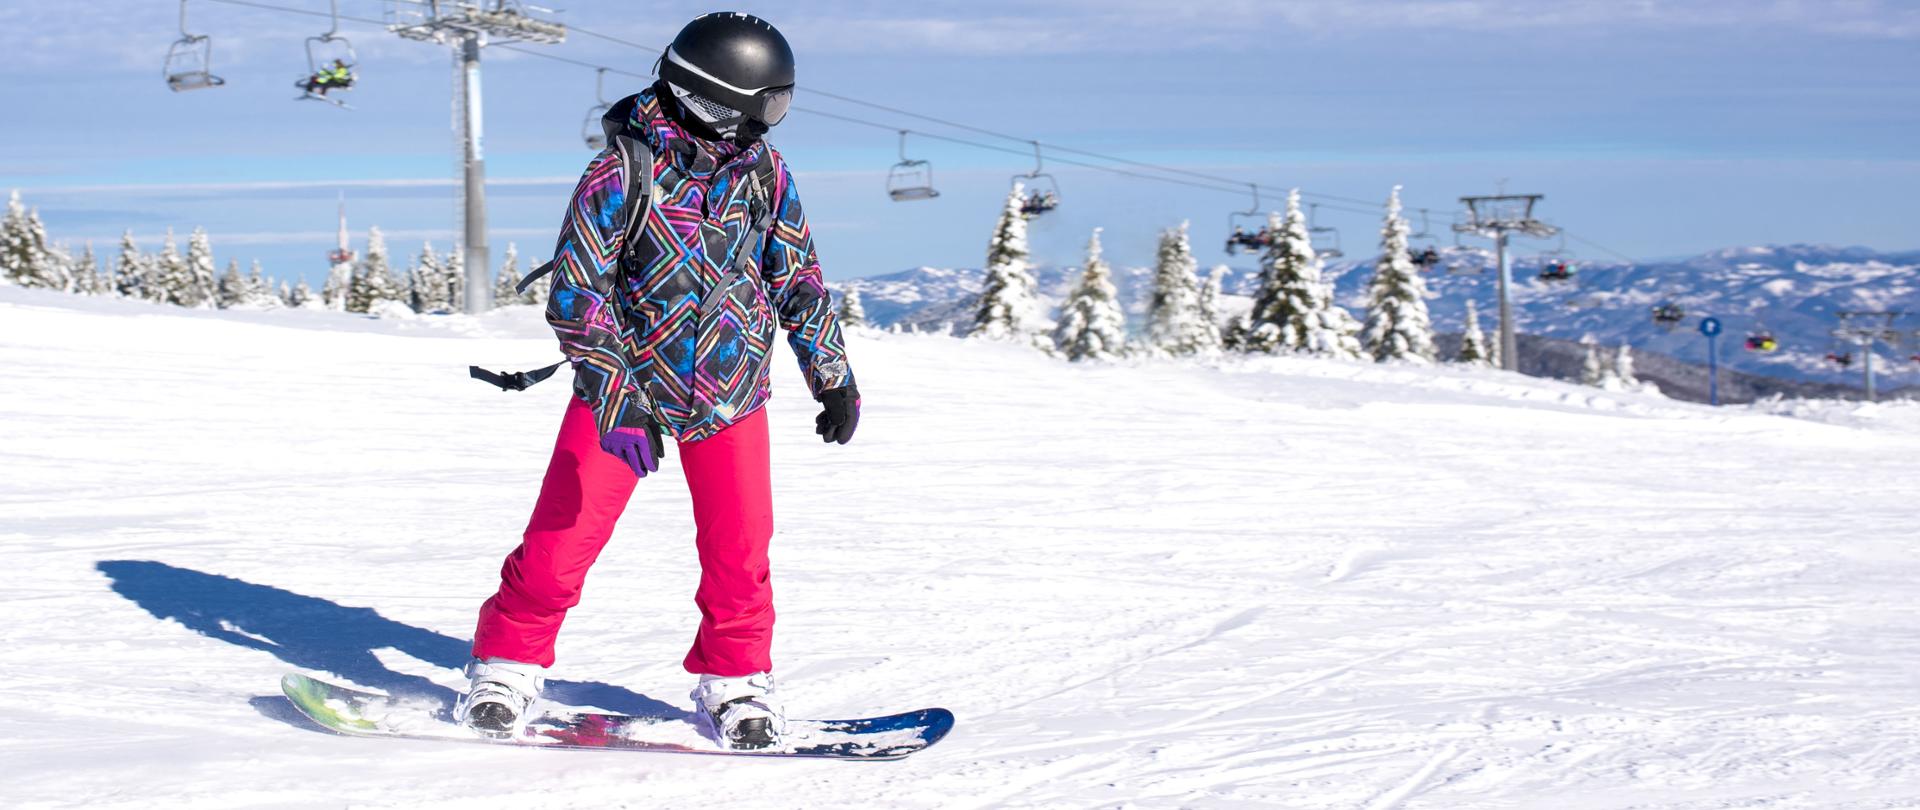 A girl learning to snowboard at a mountain resort with the ski lift in the background